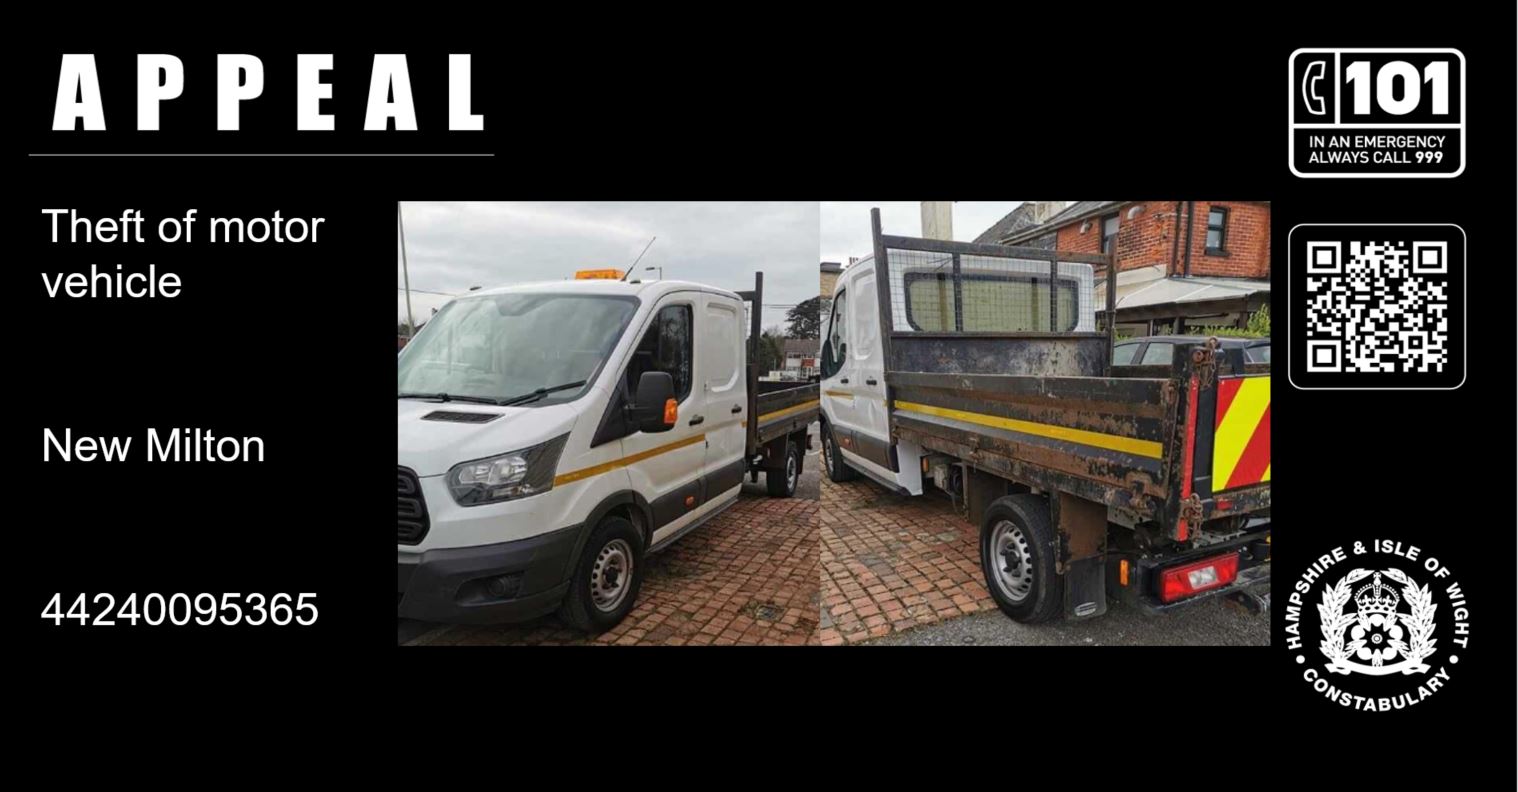 The van was stolen from the Wheatsheaf Inn car park in New Milton on March 5. Picture: Hampshire Police